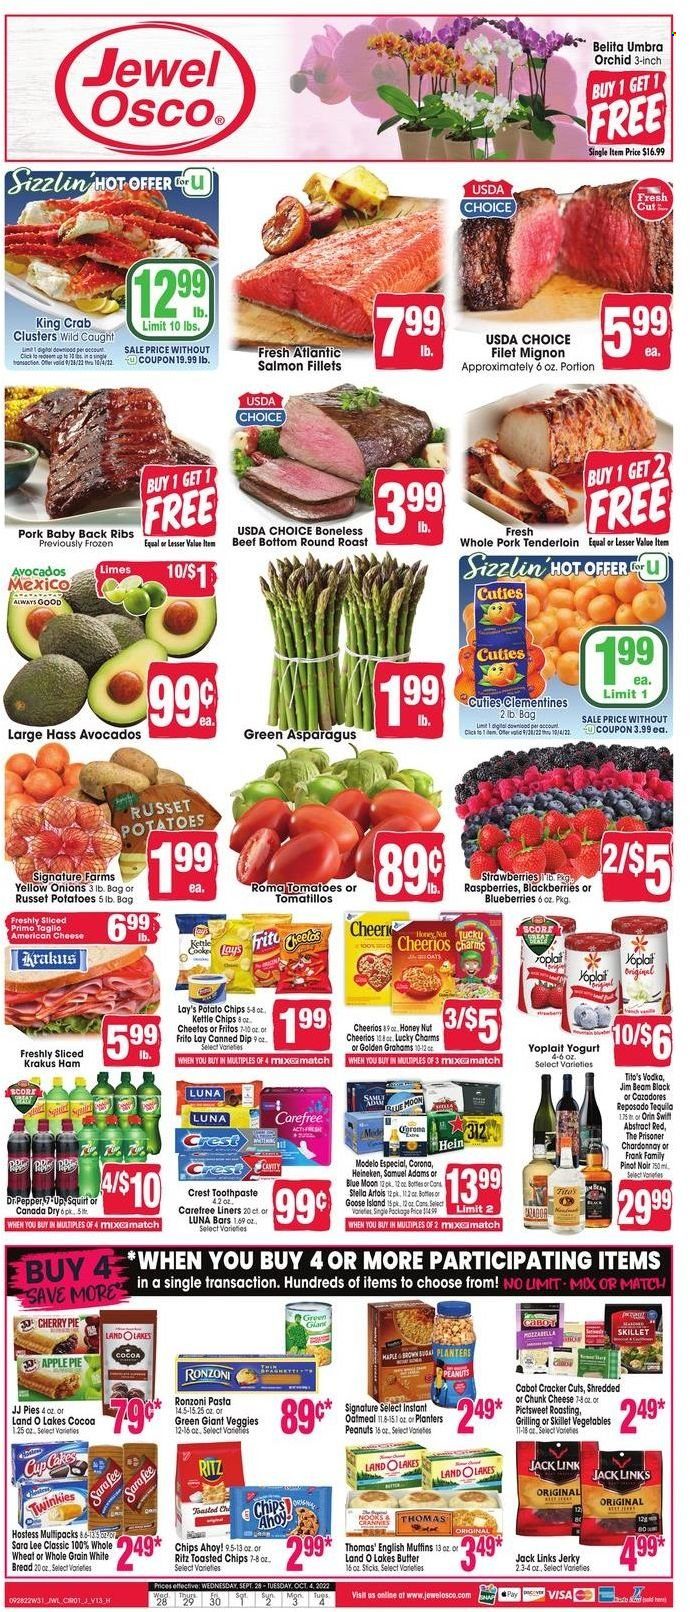 thumbnail - Jewel Osco Flyer - 09/28/2022 - 10/04/2022 - Sales products - bread, english muffins, white bread, pie, Sara Lee, apple pie, cherry pie, asparagus, russet potatoes, tomatillo, tomatoes, onion, avocado, blackberries, blueberries, limes, salmon, salmon fillet, king crab, crab, spaghetti, pasta, Annie's, ham, jerky, american cheese, cheese, chunk cheese, yoghurt, Yoplait, butter, dip, crackers, Chips Ahoy!, RITZ, Fritos, potato chips, Cheetos, Lay’s, Jack Link's, cocoa, oatmeal, Cheerios, peanuts, Planters, Canada Dry, Dr. Pepper, 7UP, red wine, white wine, Chardonnay, wine, Pinot Noir, tequila, vodka, Jim Beam, beer, Corona Extra, Heineken, Modelo, beef meat, beef tenderloin, round roast, pork meat, pork ribs, pork tenderloin, pork back ribs, toothpaste, Crest, Carefree, clementines, Stella Artois, Blue Moon. Page 1.